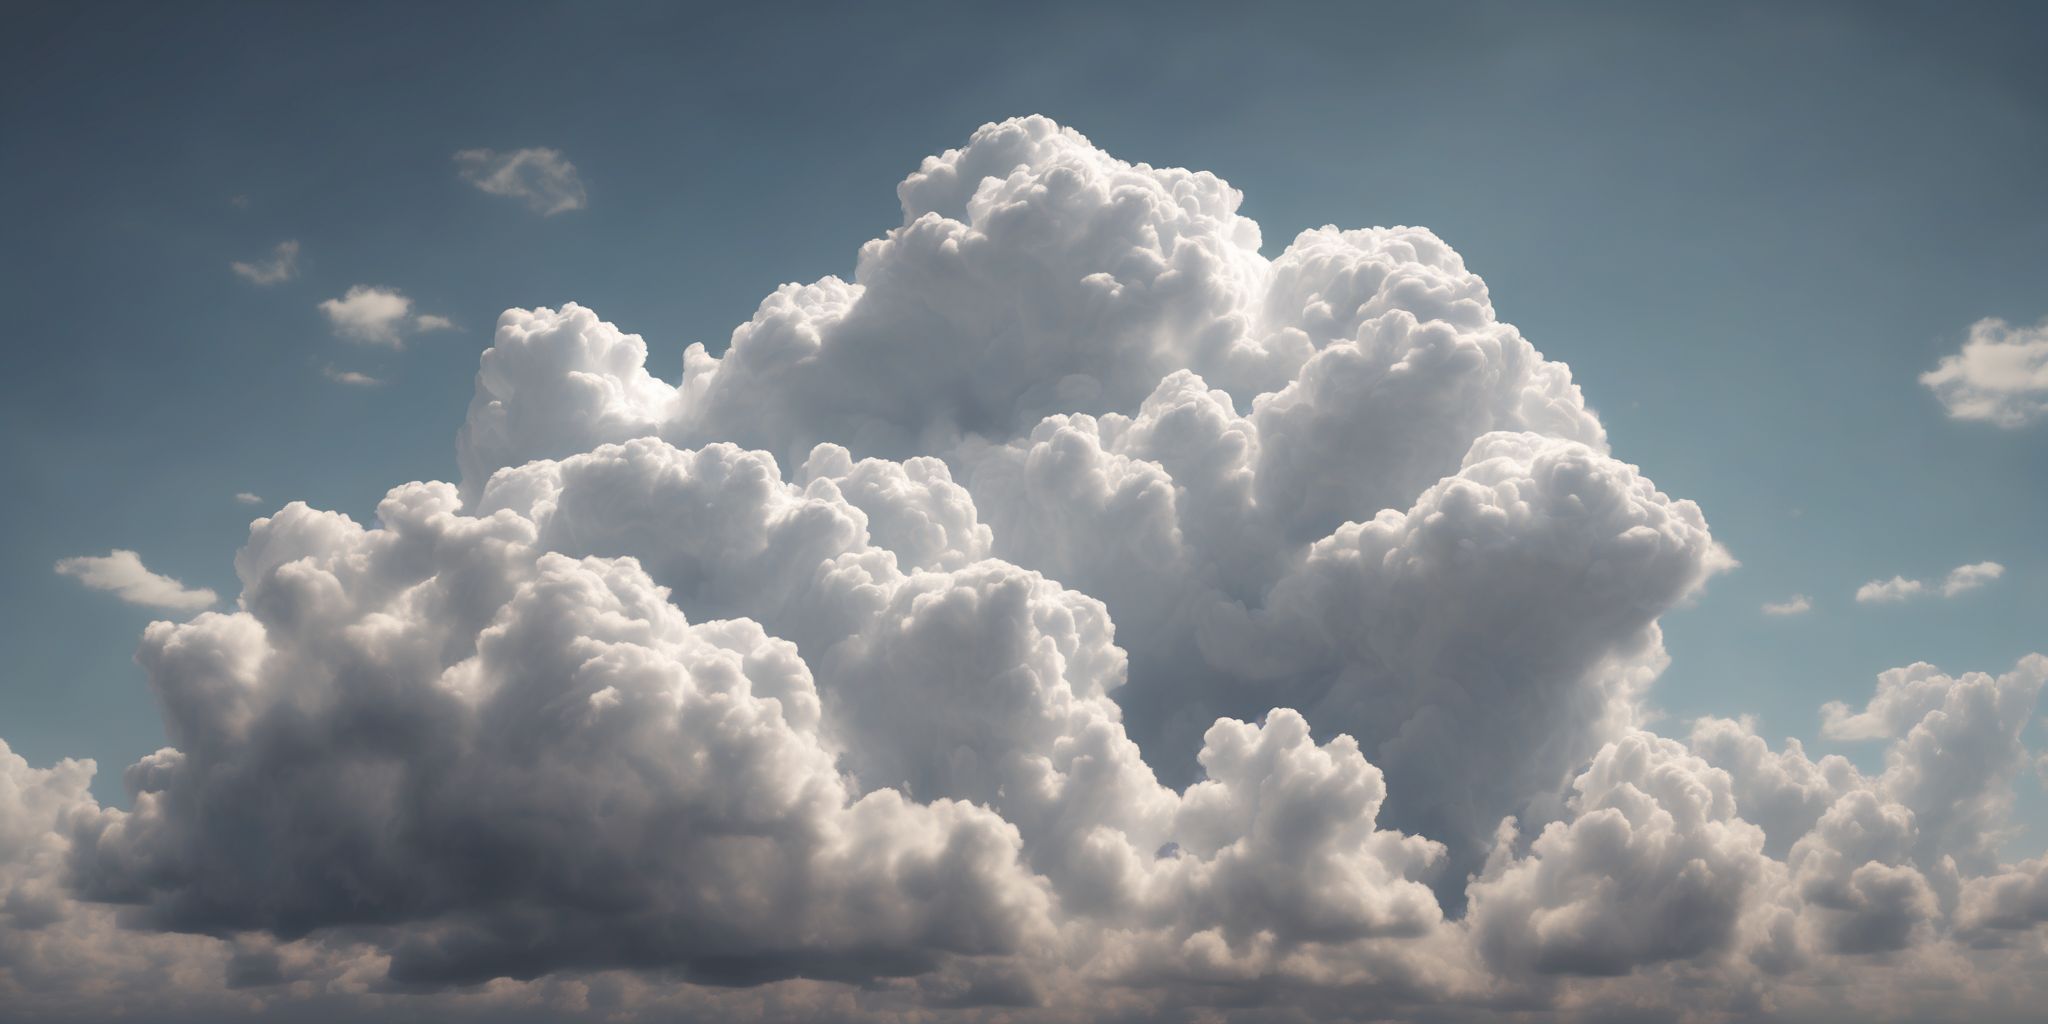 Cloud  in realistic, photographic style